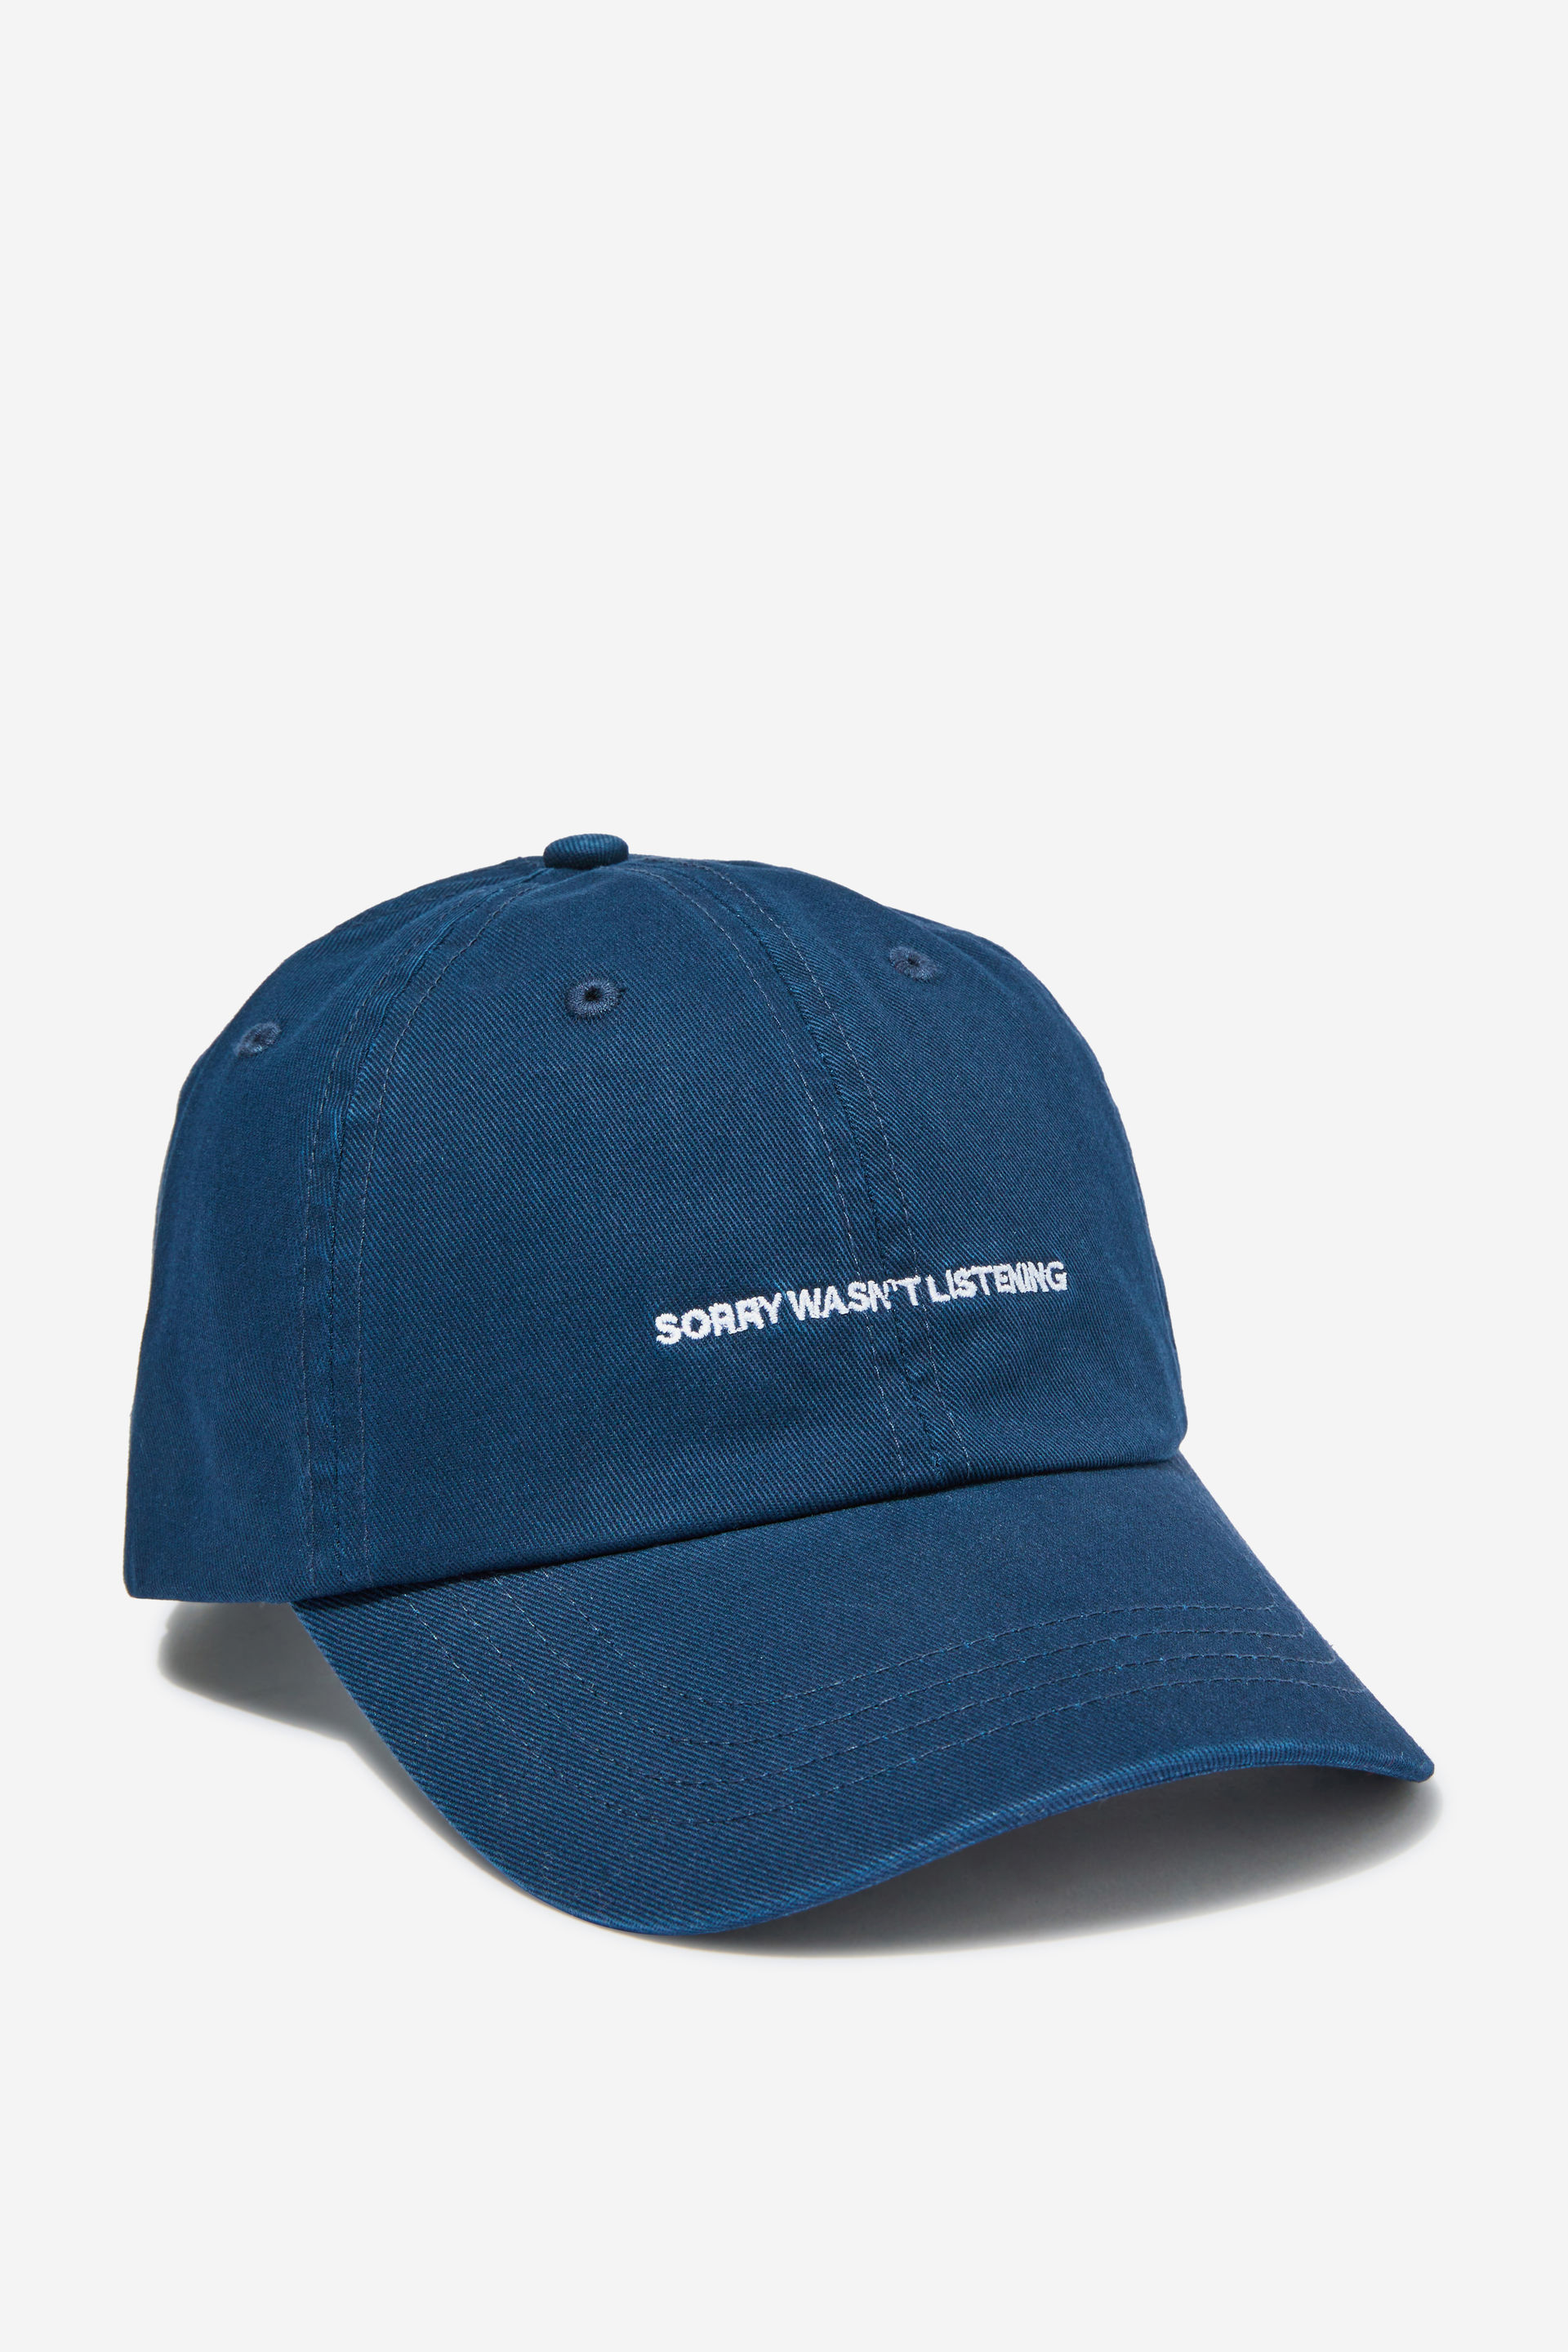 Typo - Just Another Dad Cap - Sorry wasn’t listening navy